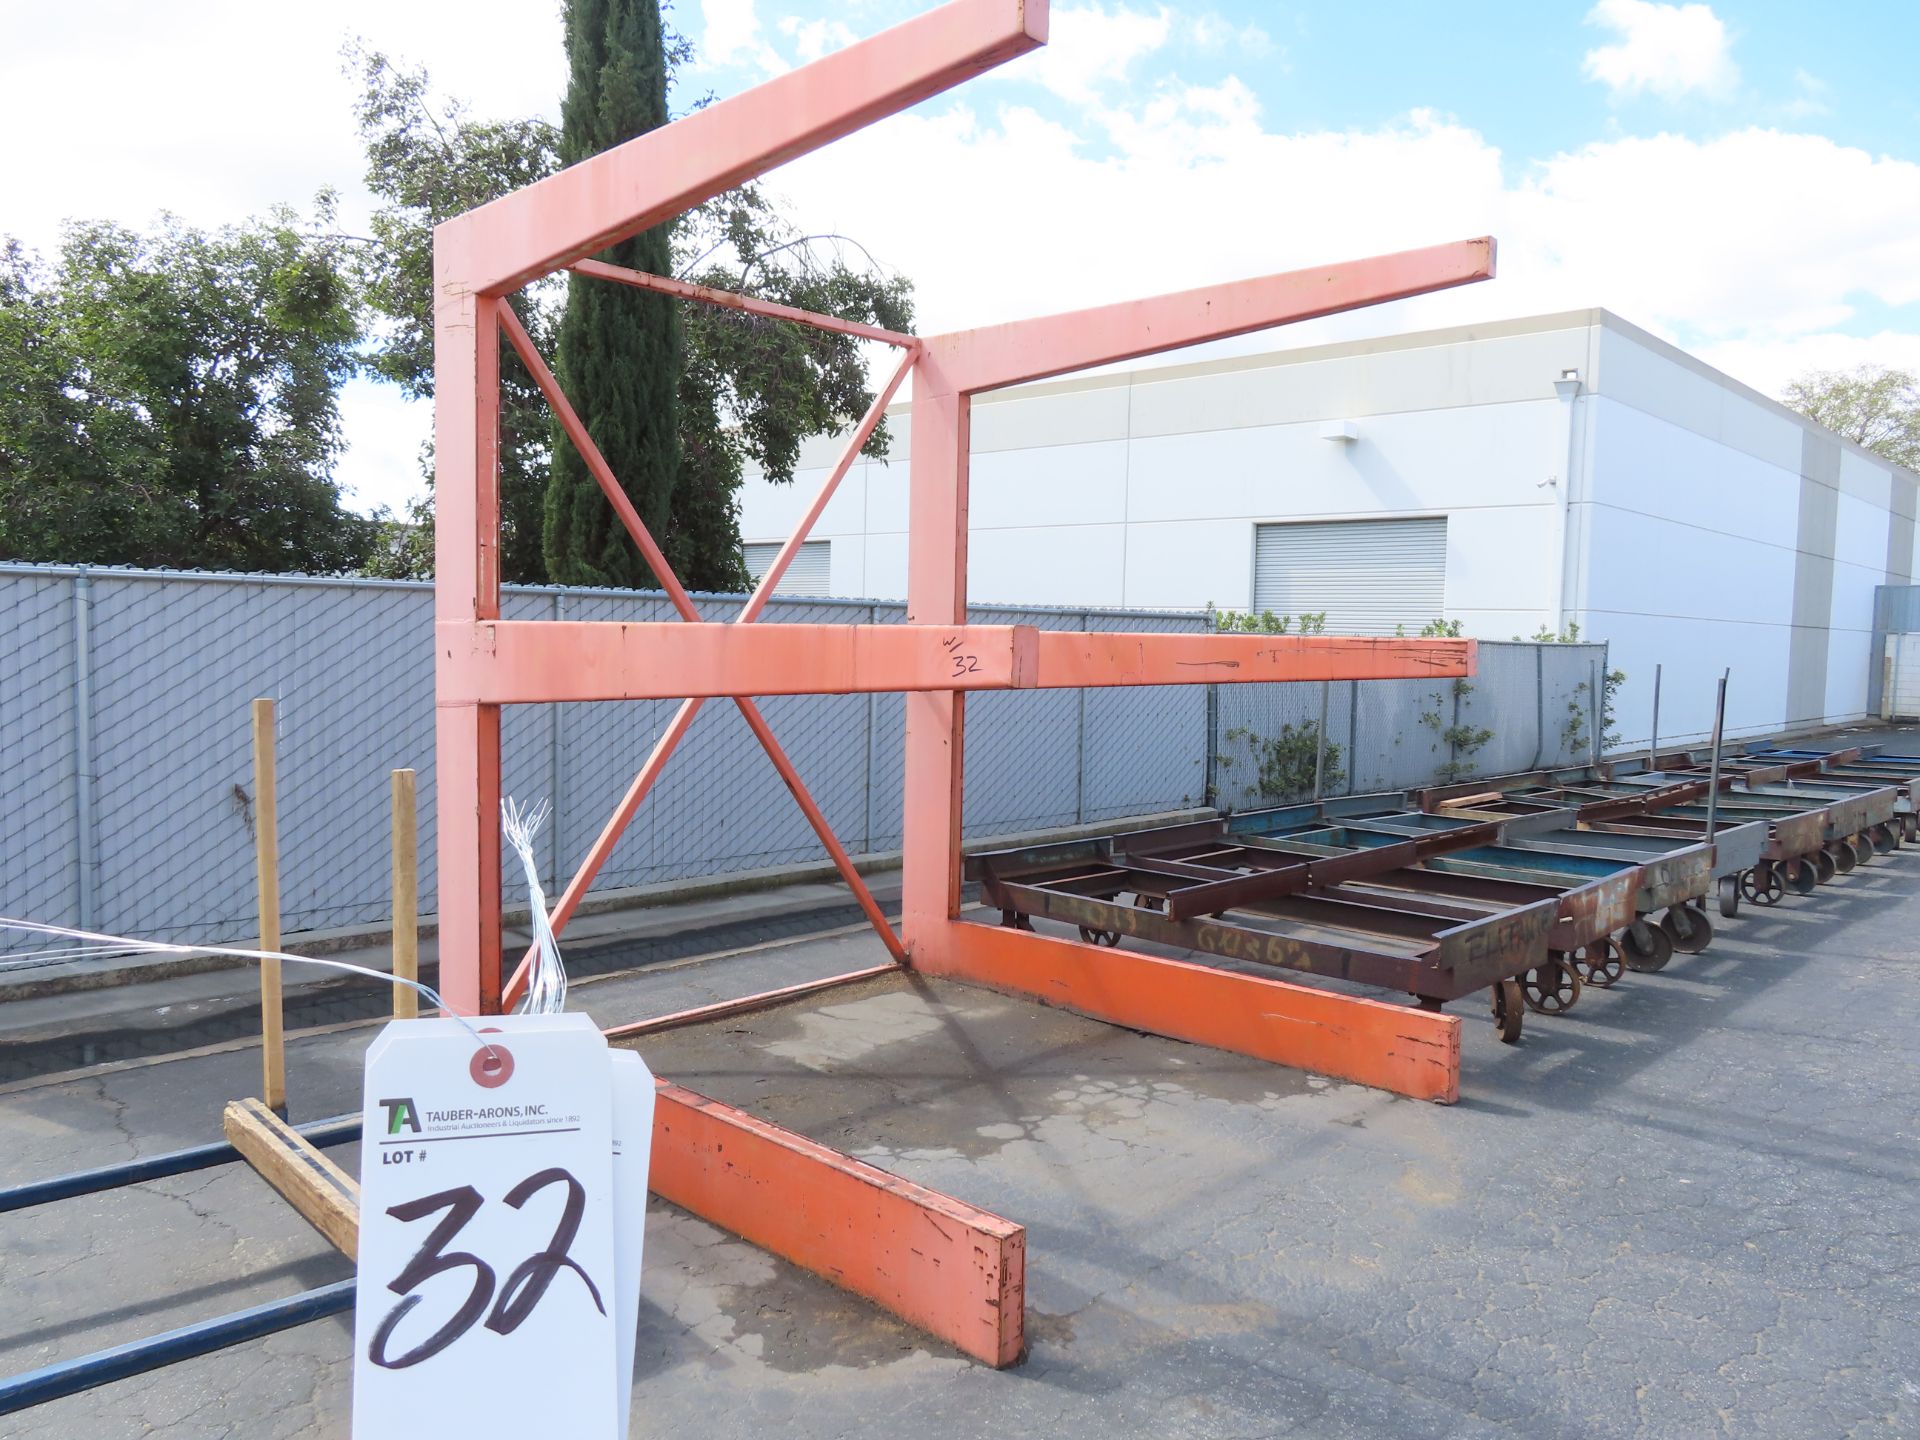 (Lot) Cantilever Racks (Approx 8'x8'x8')